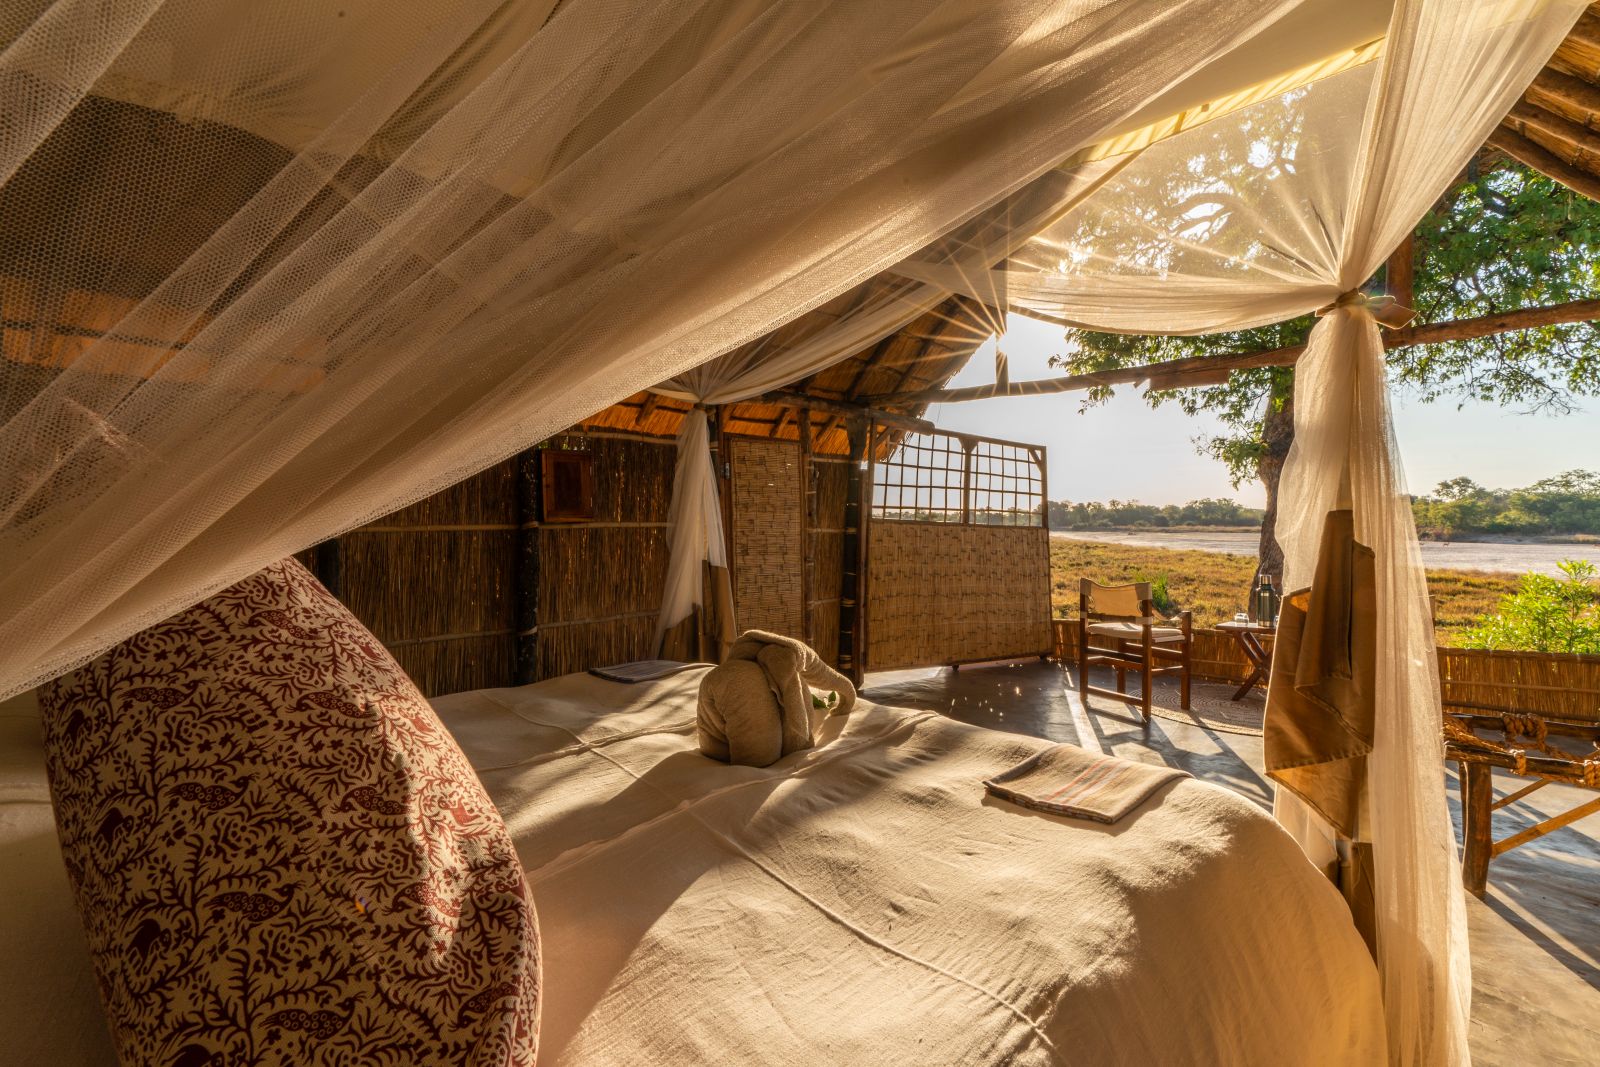 View from the double bed of a thachted room at luxury safari camp Luwi Bush Camp in Zambia over the private terrace and surroundings